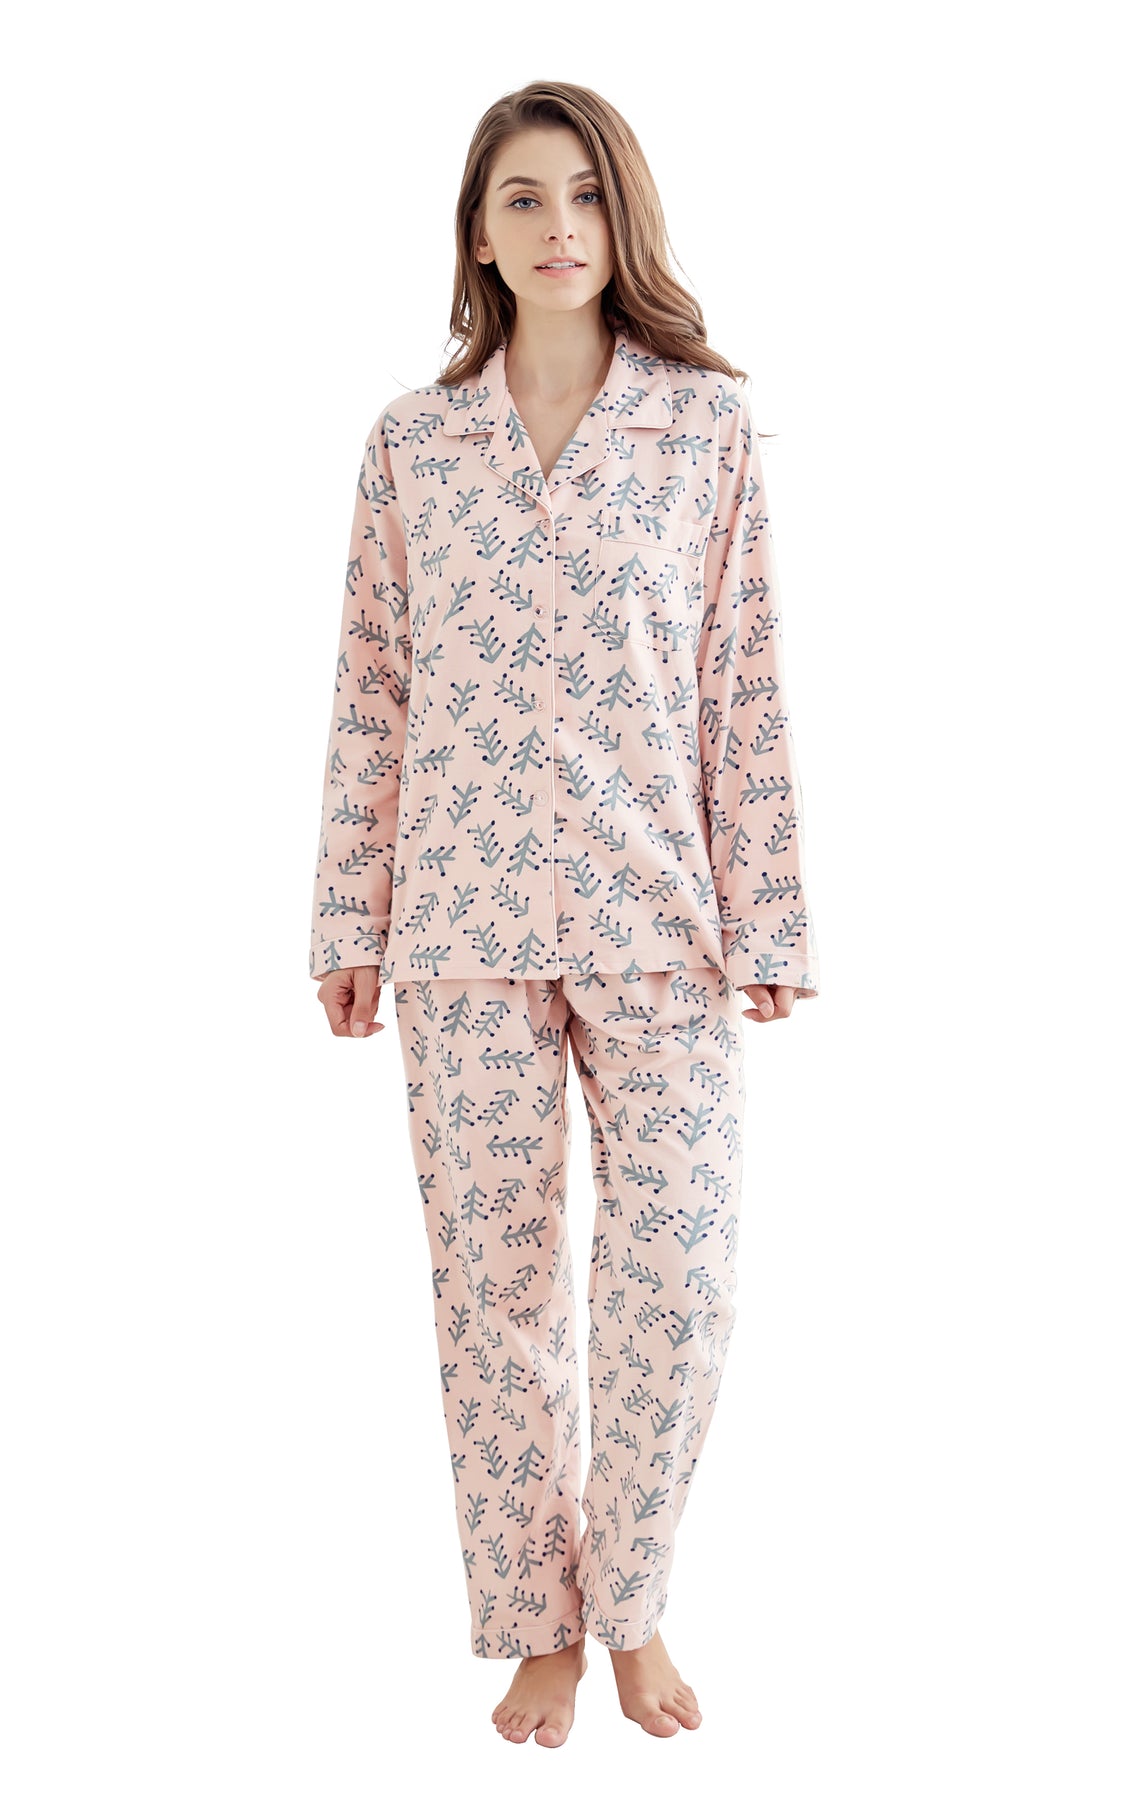 Women's Cotton Long Sleeve Flannel Pajama Set-Light Pink with Green Br ...